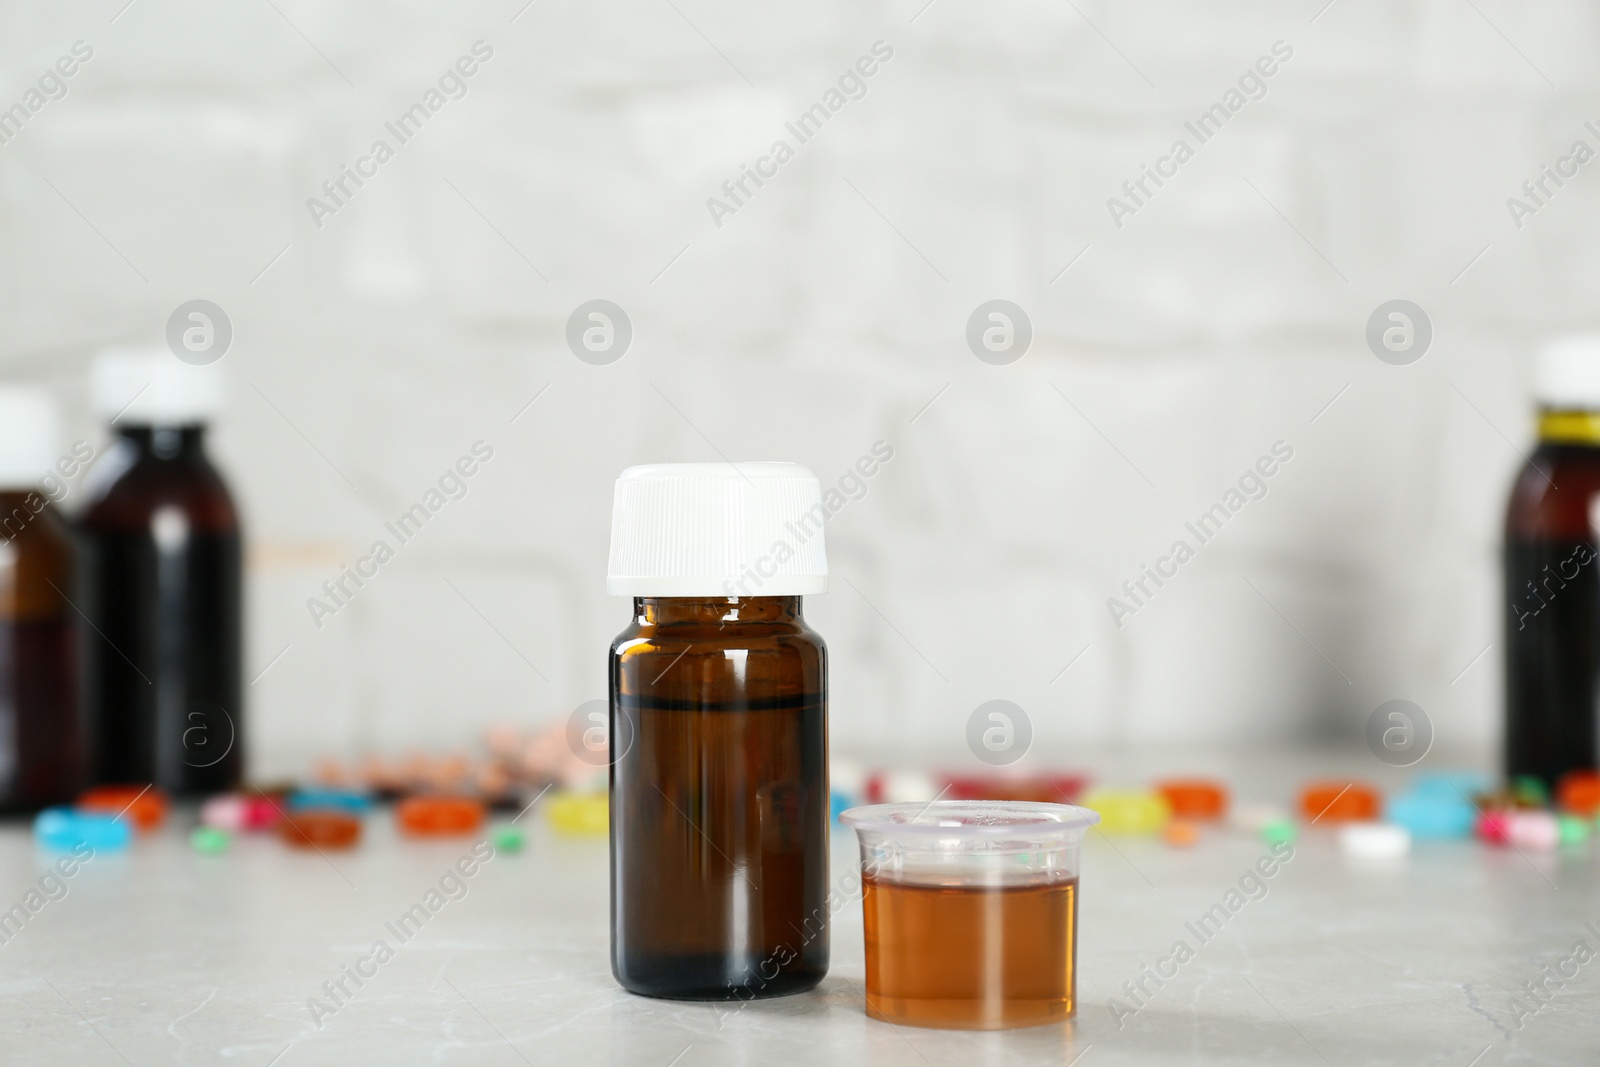 Photo of Bottle of cough syrup and measuring cup on light grey table. Space for text